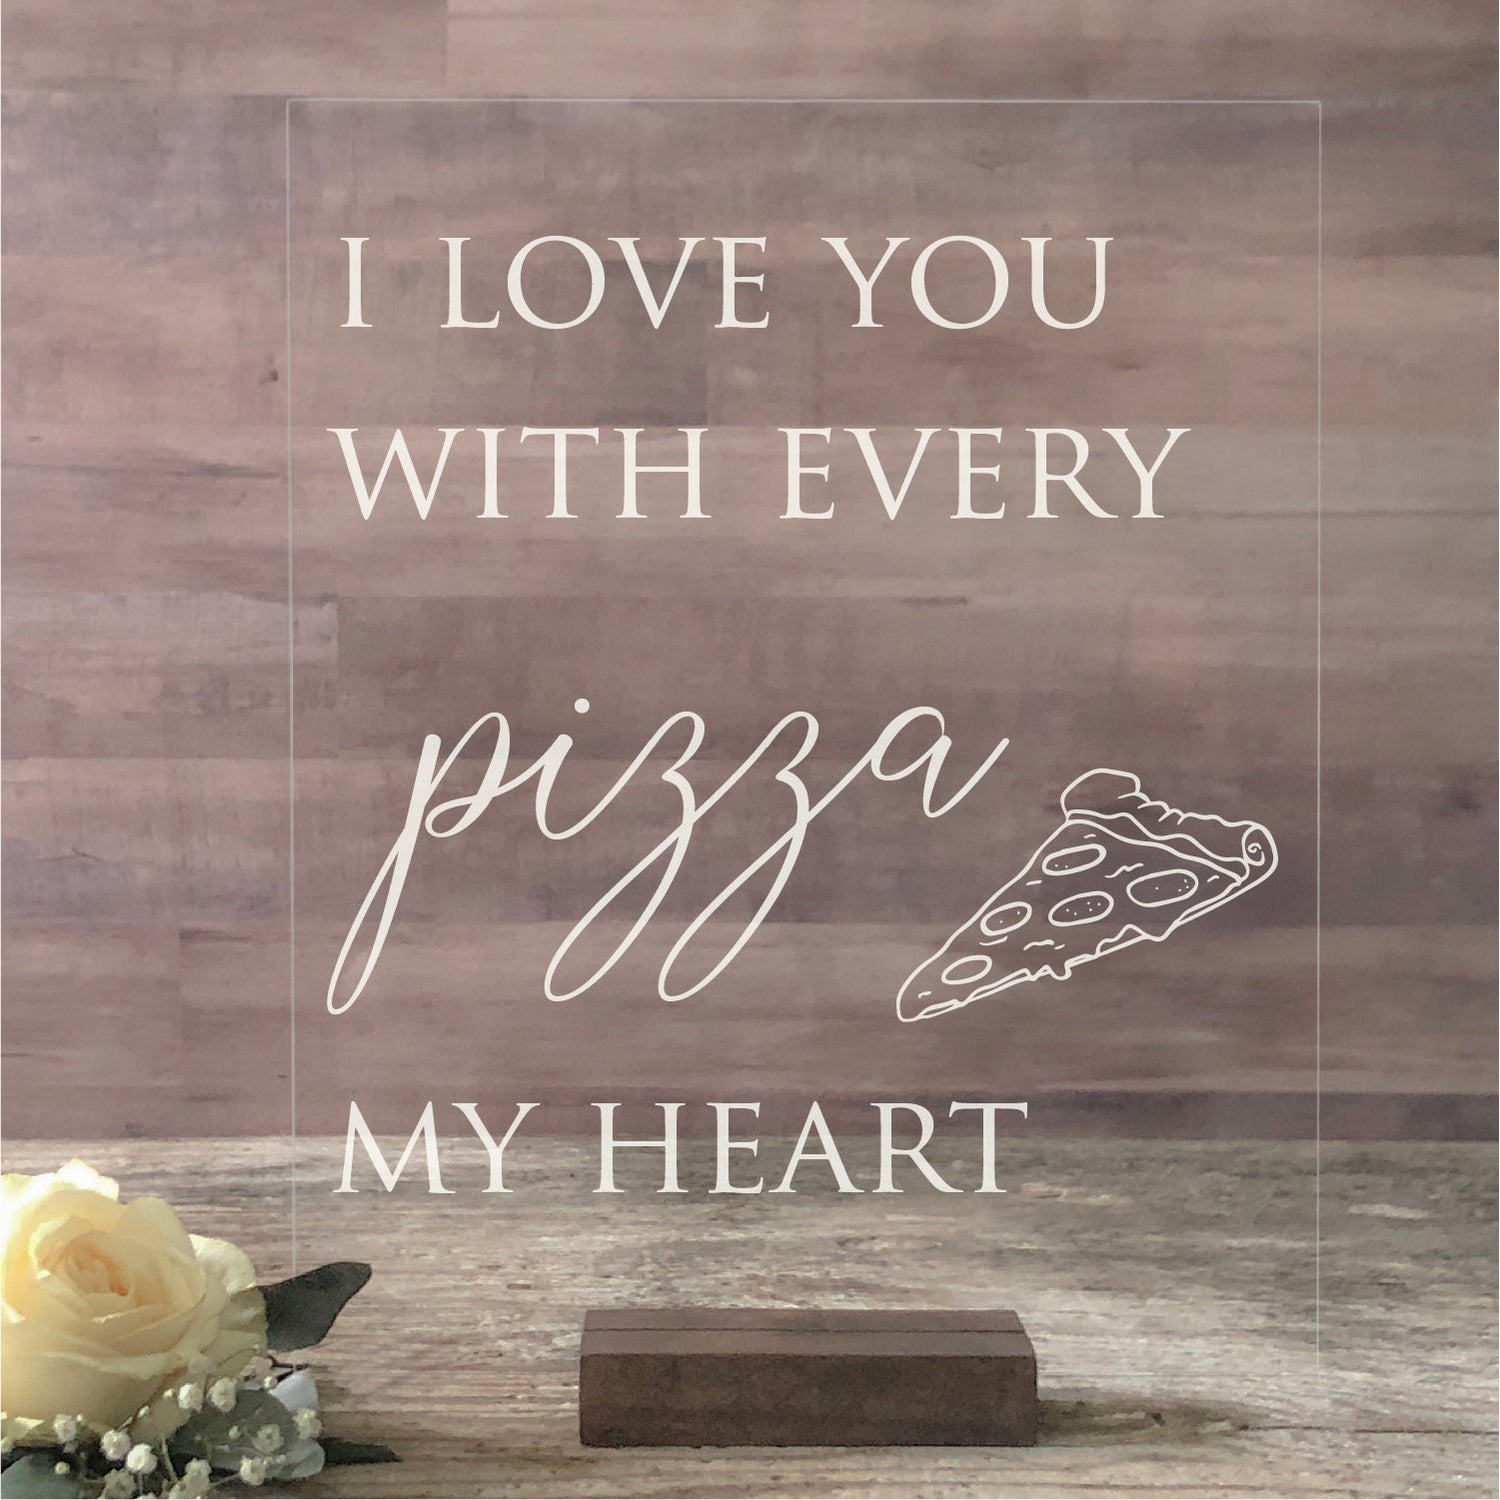 Acrylic Pizza My Heart Wedding Reception Food Table Sign | Lucite Table Sign | Wedding Buffet Table Sign | SCC-209 - SCC Signs